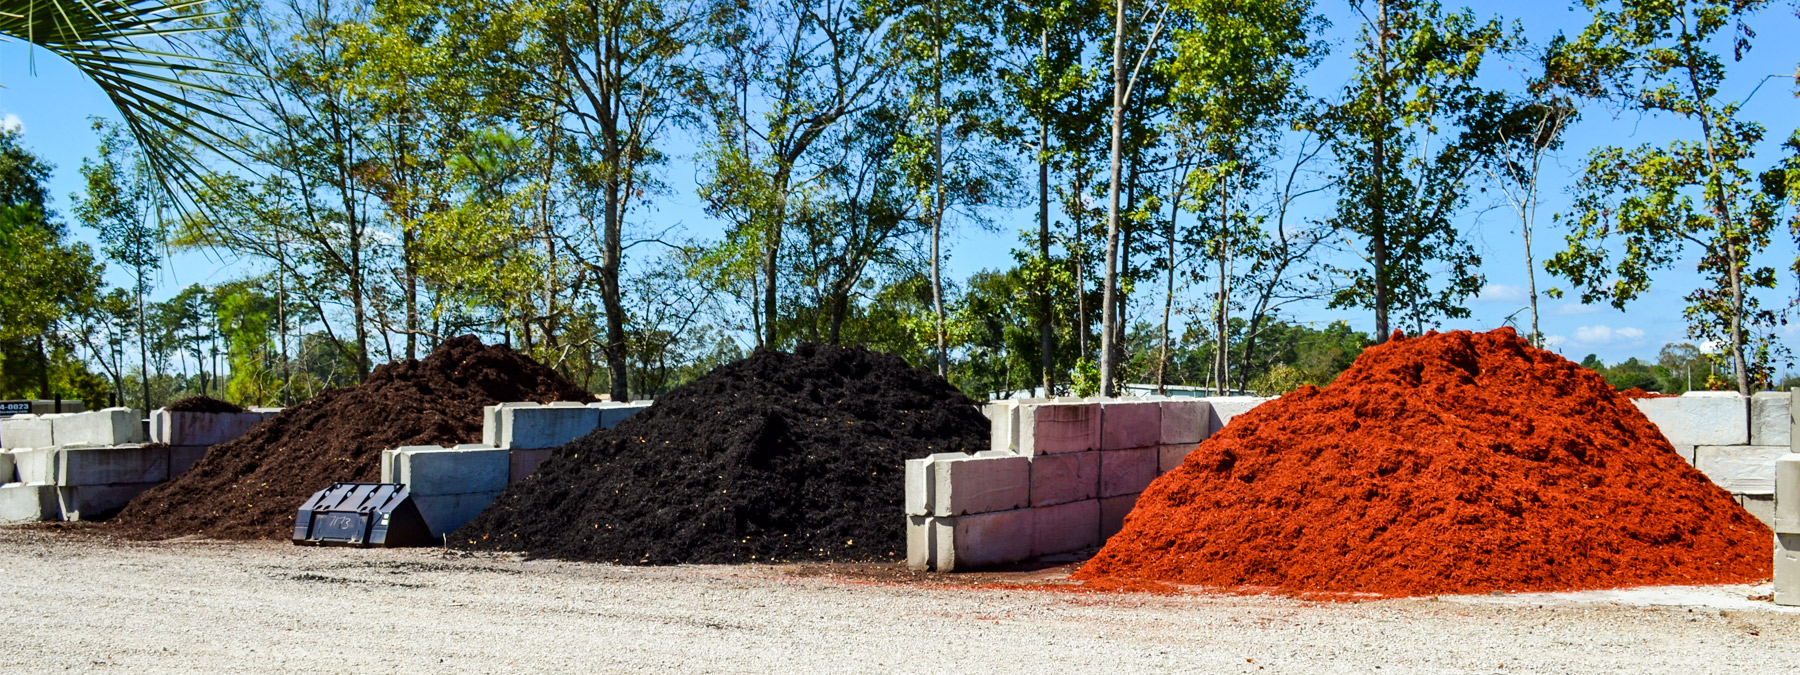 A pile of mulch and bricks in front of some trees.